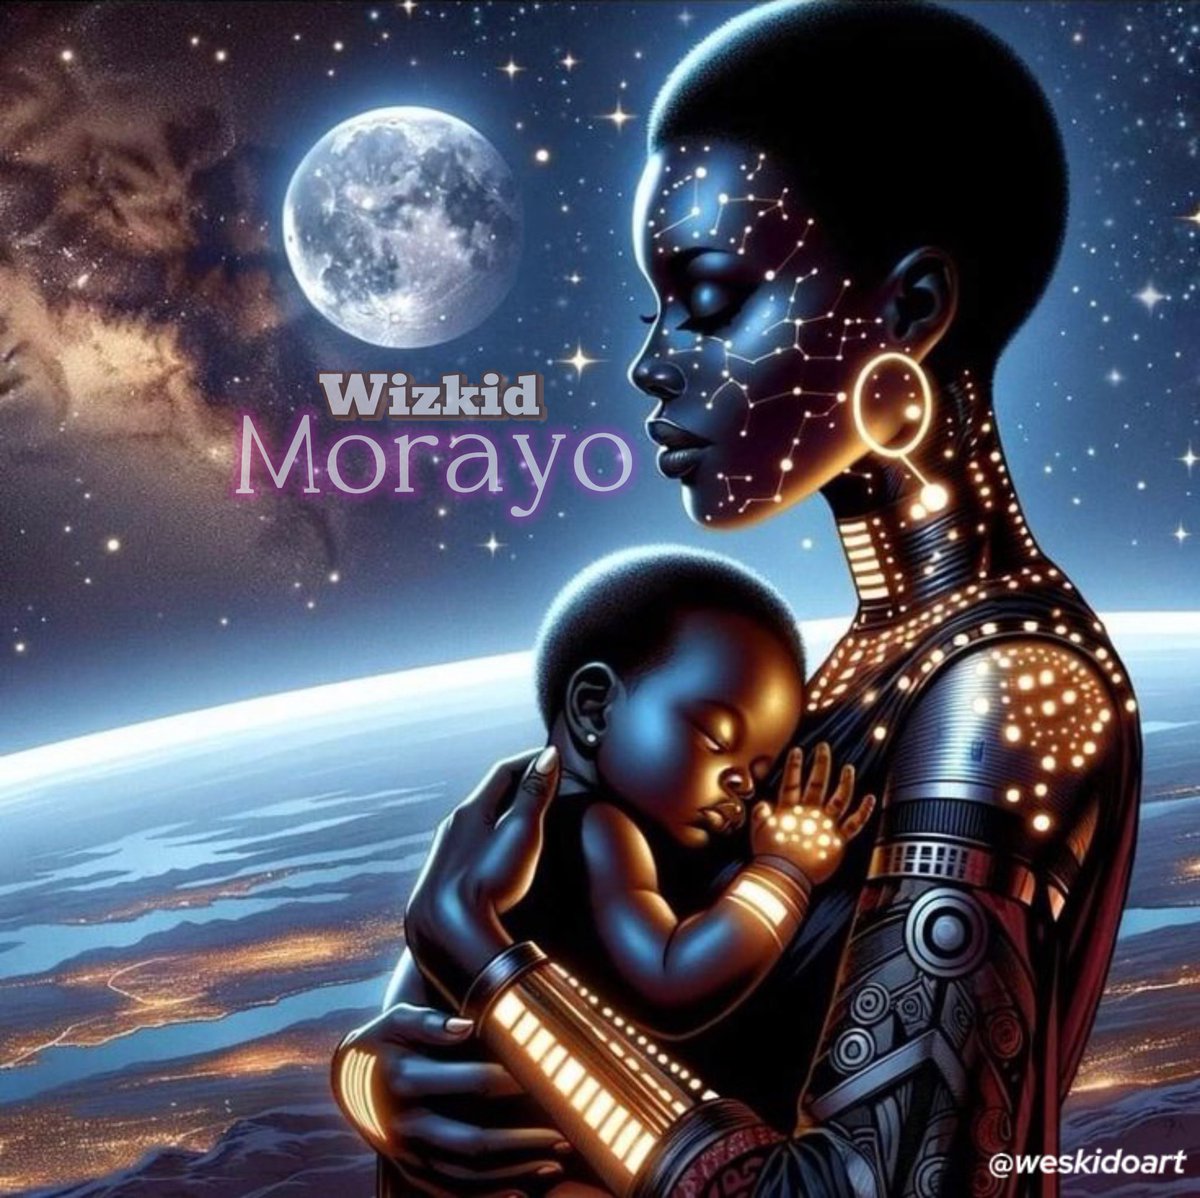 Wizkid once said Made In Lagos was his best album, he released it and it turned out to be truem.. Big Wiz done talk same thing about Morayo, no doubt, it's going to be his best album.. And best in Africa. Don't play with popsy.. Retweet this if you feel Morayo will be dope..